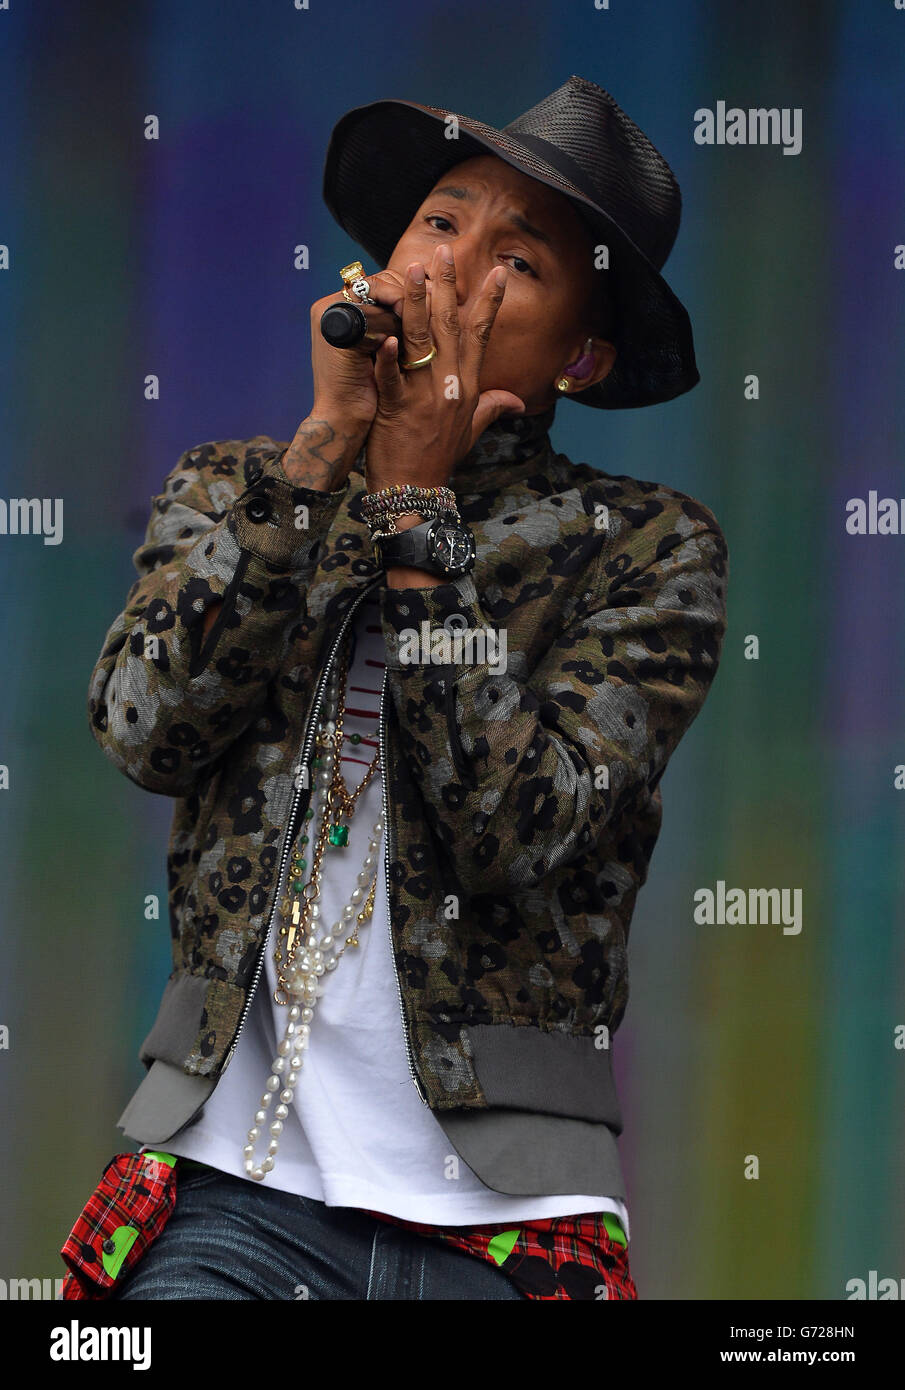 Pharrell Williams performing on stage during Radio 1's Big Weekend at Glasgow Green in Glasgow. PRESS ASSOCIATION Photo. Picture date: Saturday May 24, 2014. See PA story SHOWBIZ BigWeekend. Photo credit should read: Mark Runnacles/PA Wire Stock Photo